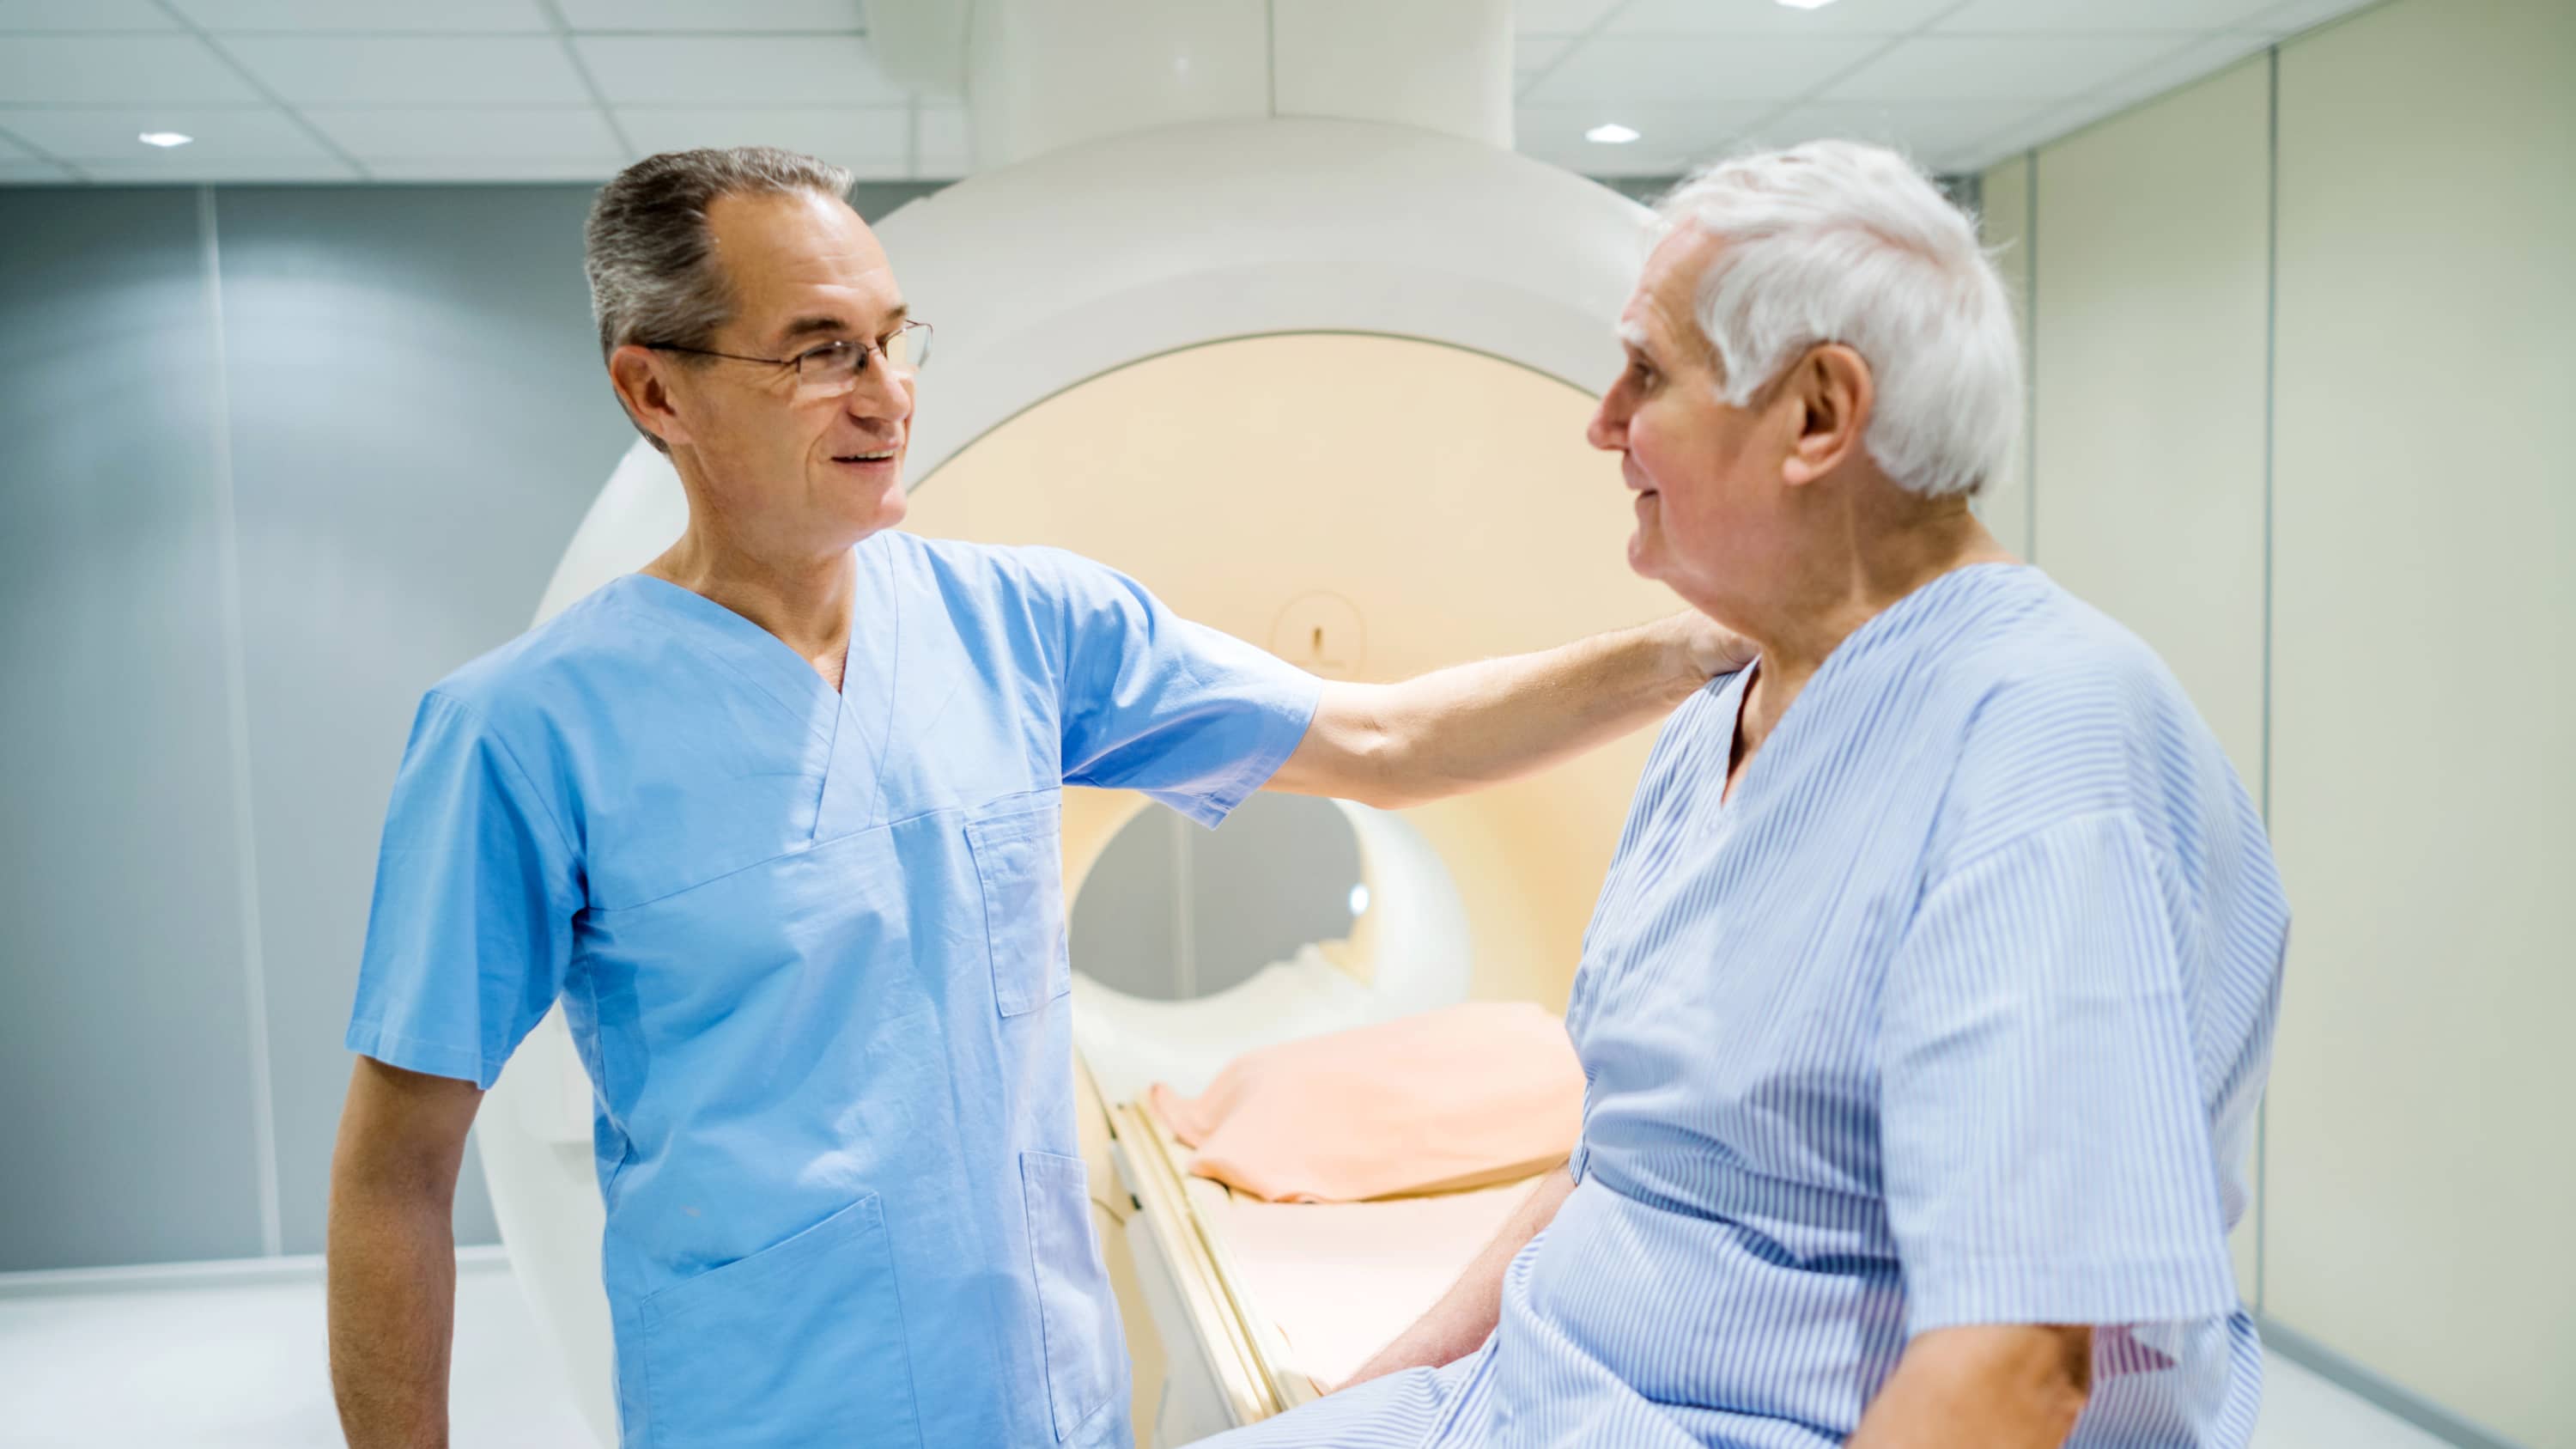 A doctor discusses Stereotactic Body Radiotherapy with a patient.